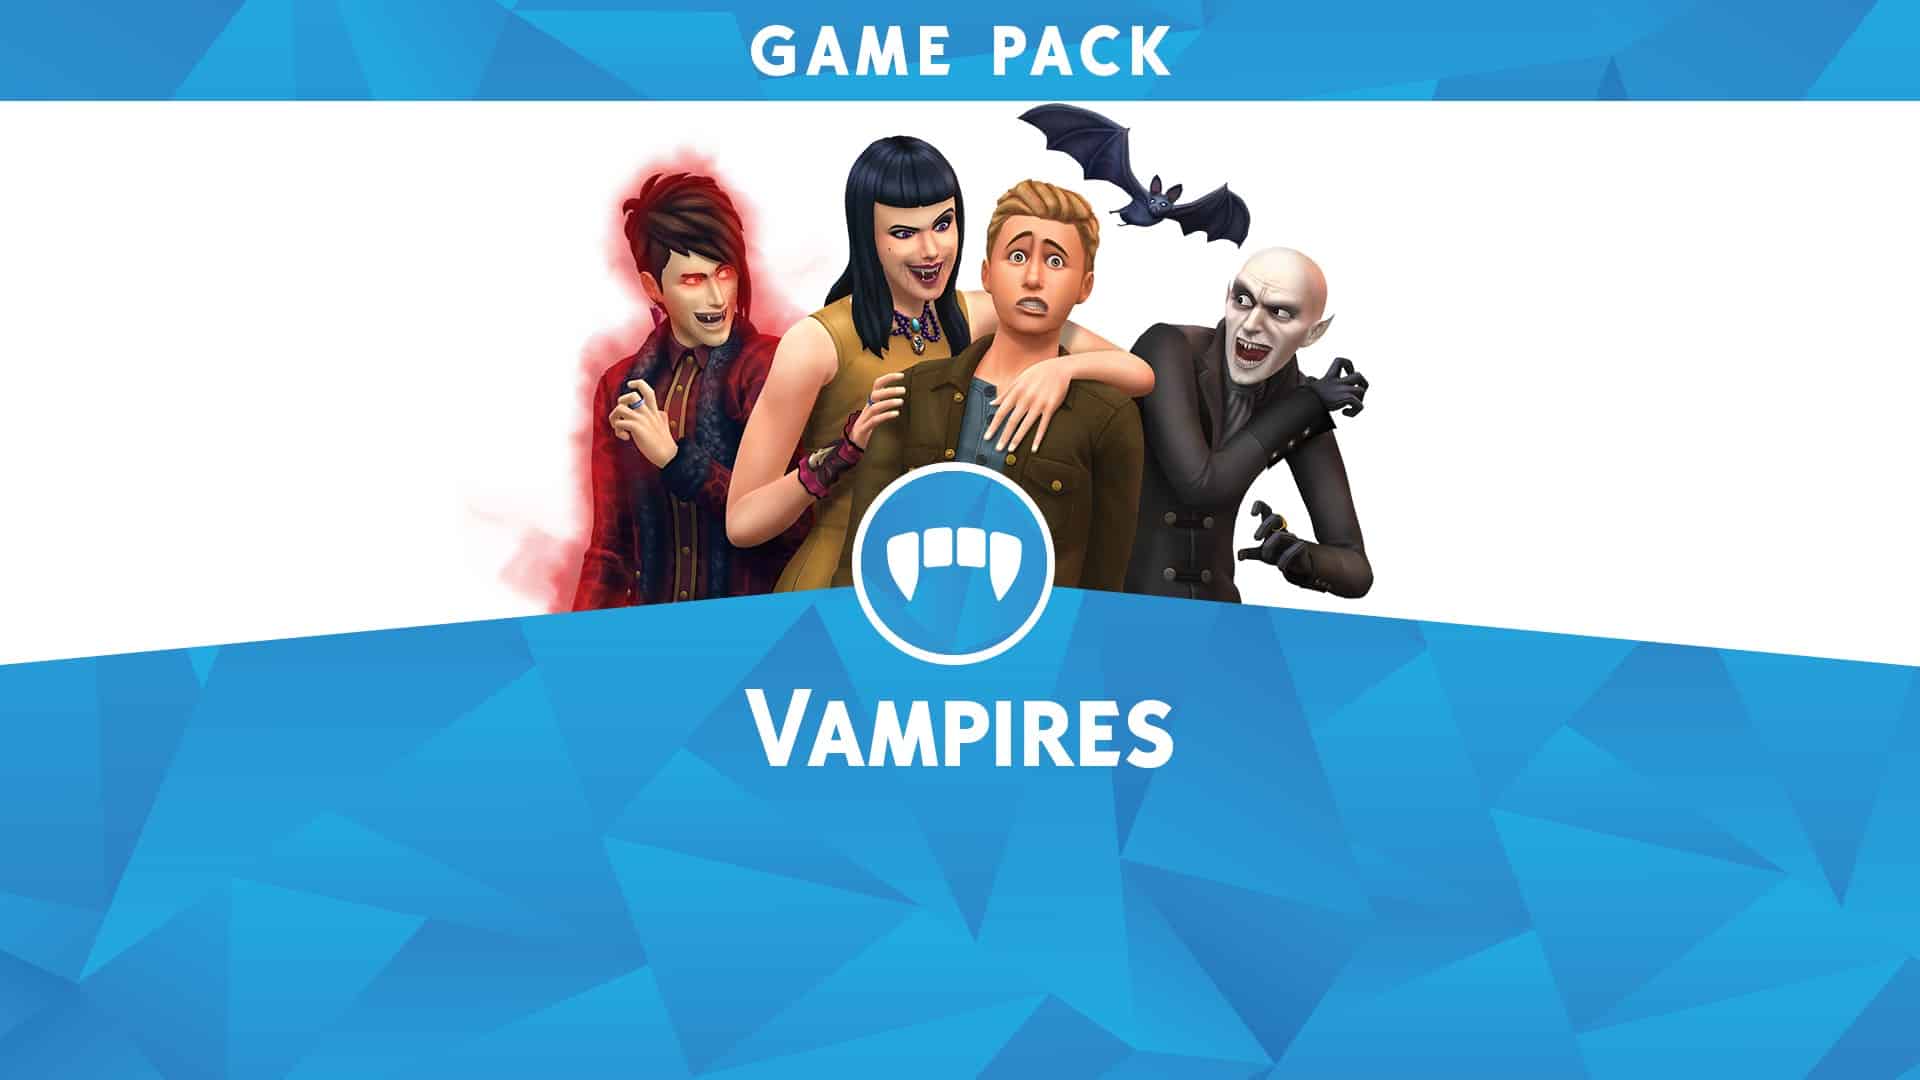 The Sims 4: Get Famous Cheats & Cheat Codes for PC, PS4, and Xbox One -  Cheat Code Central